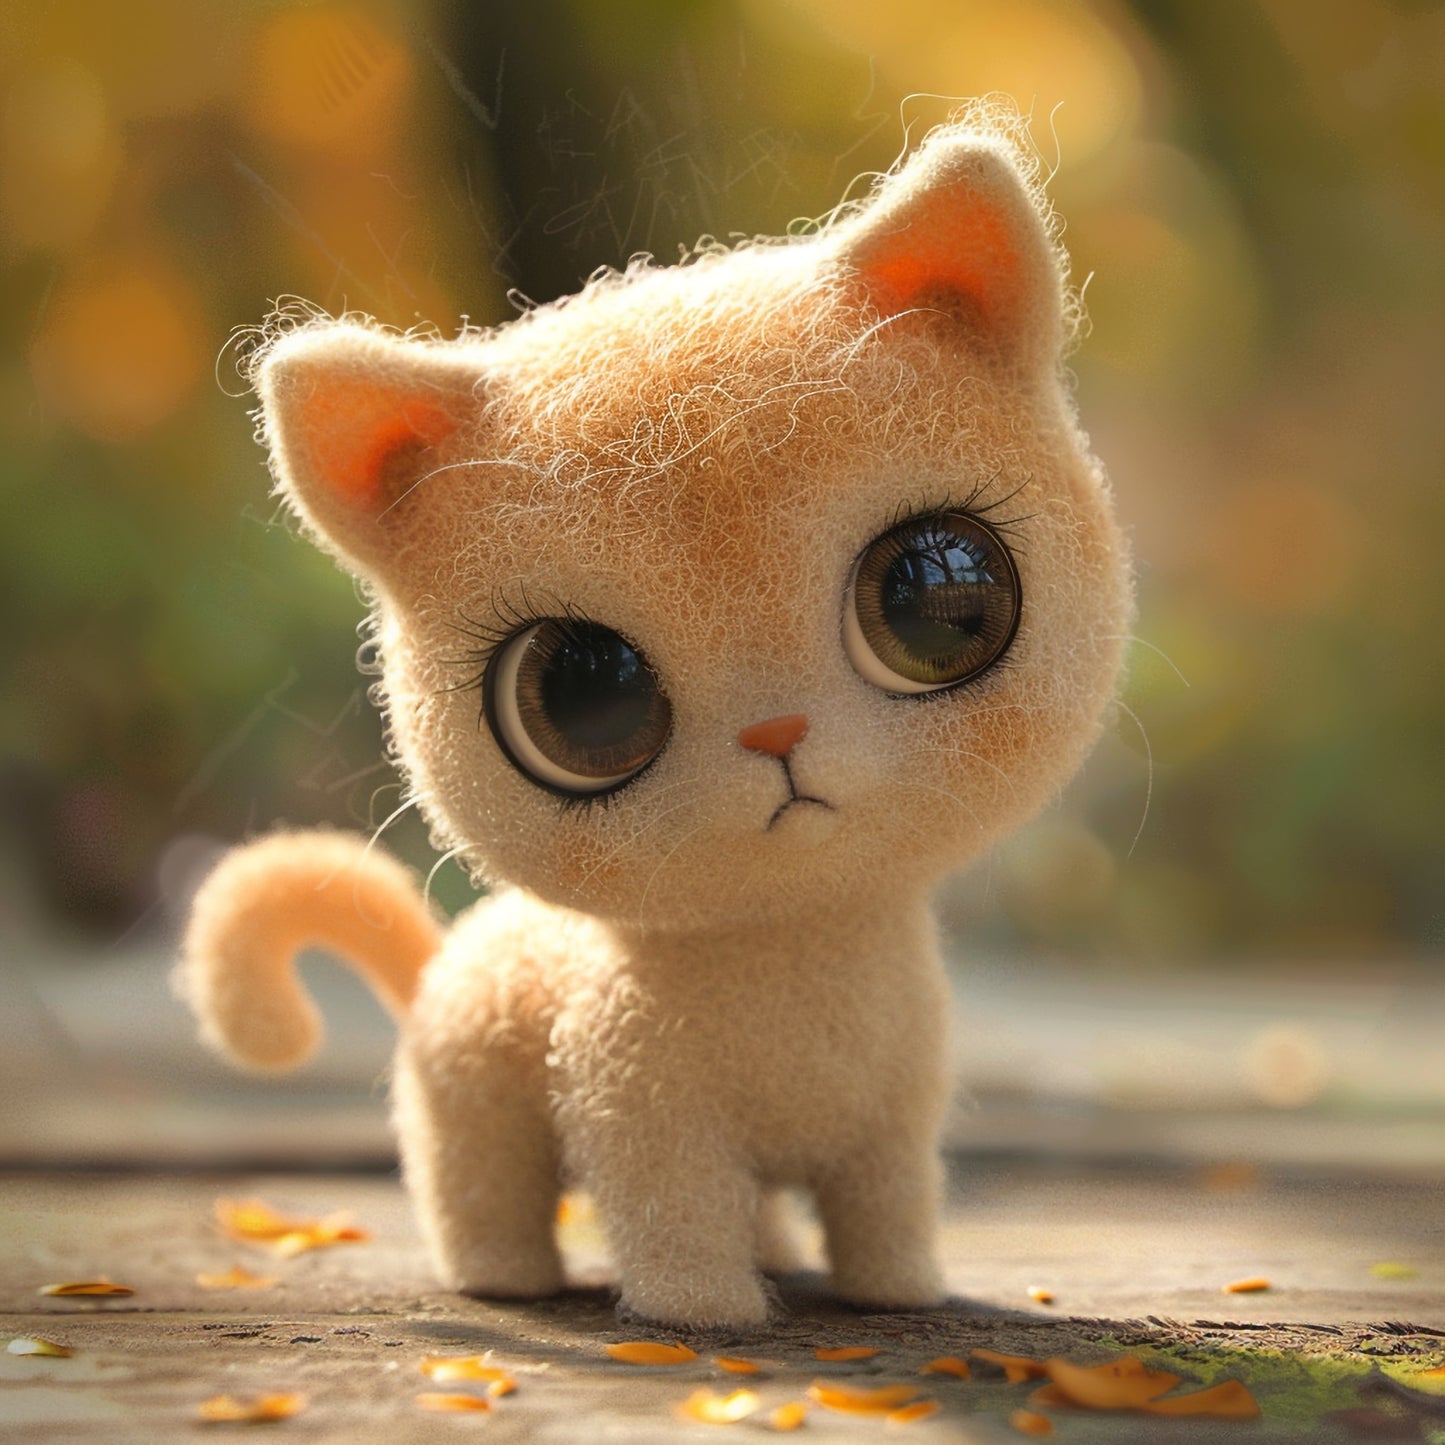 Handmade Needle Felted Cat in Artistic Isometric Style